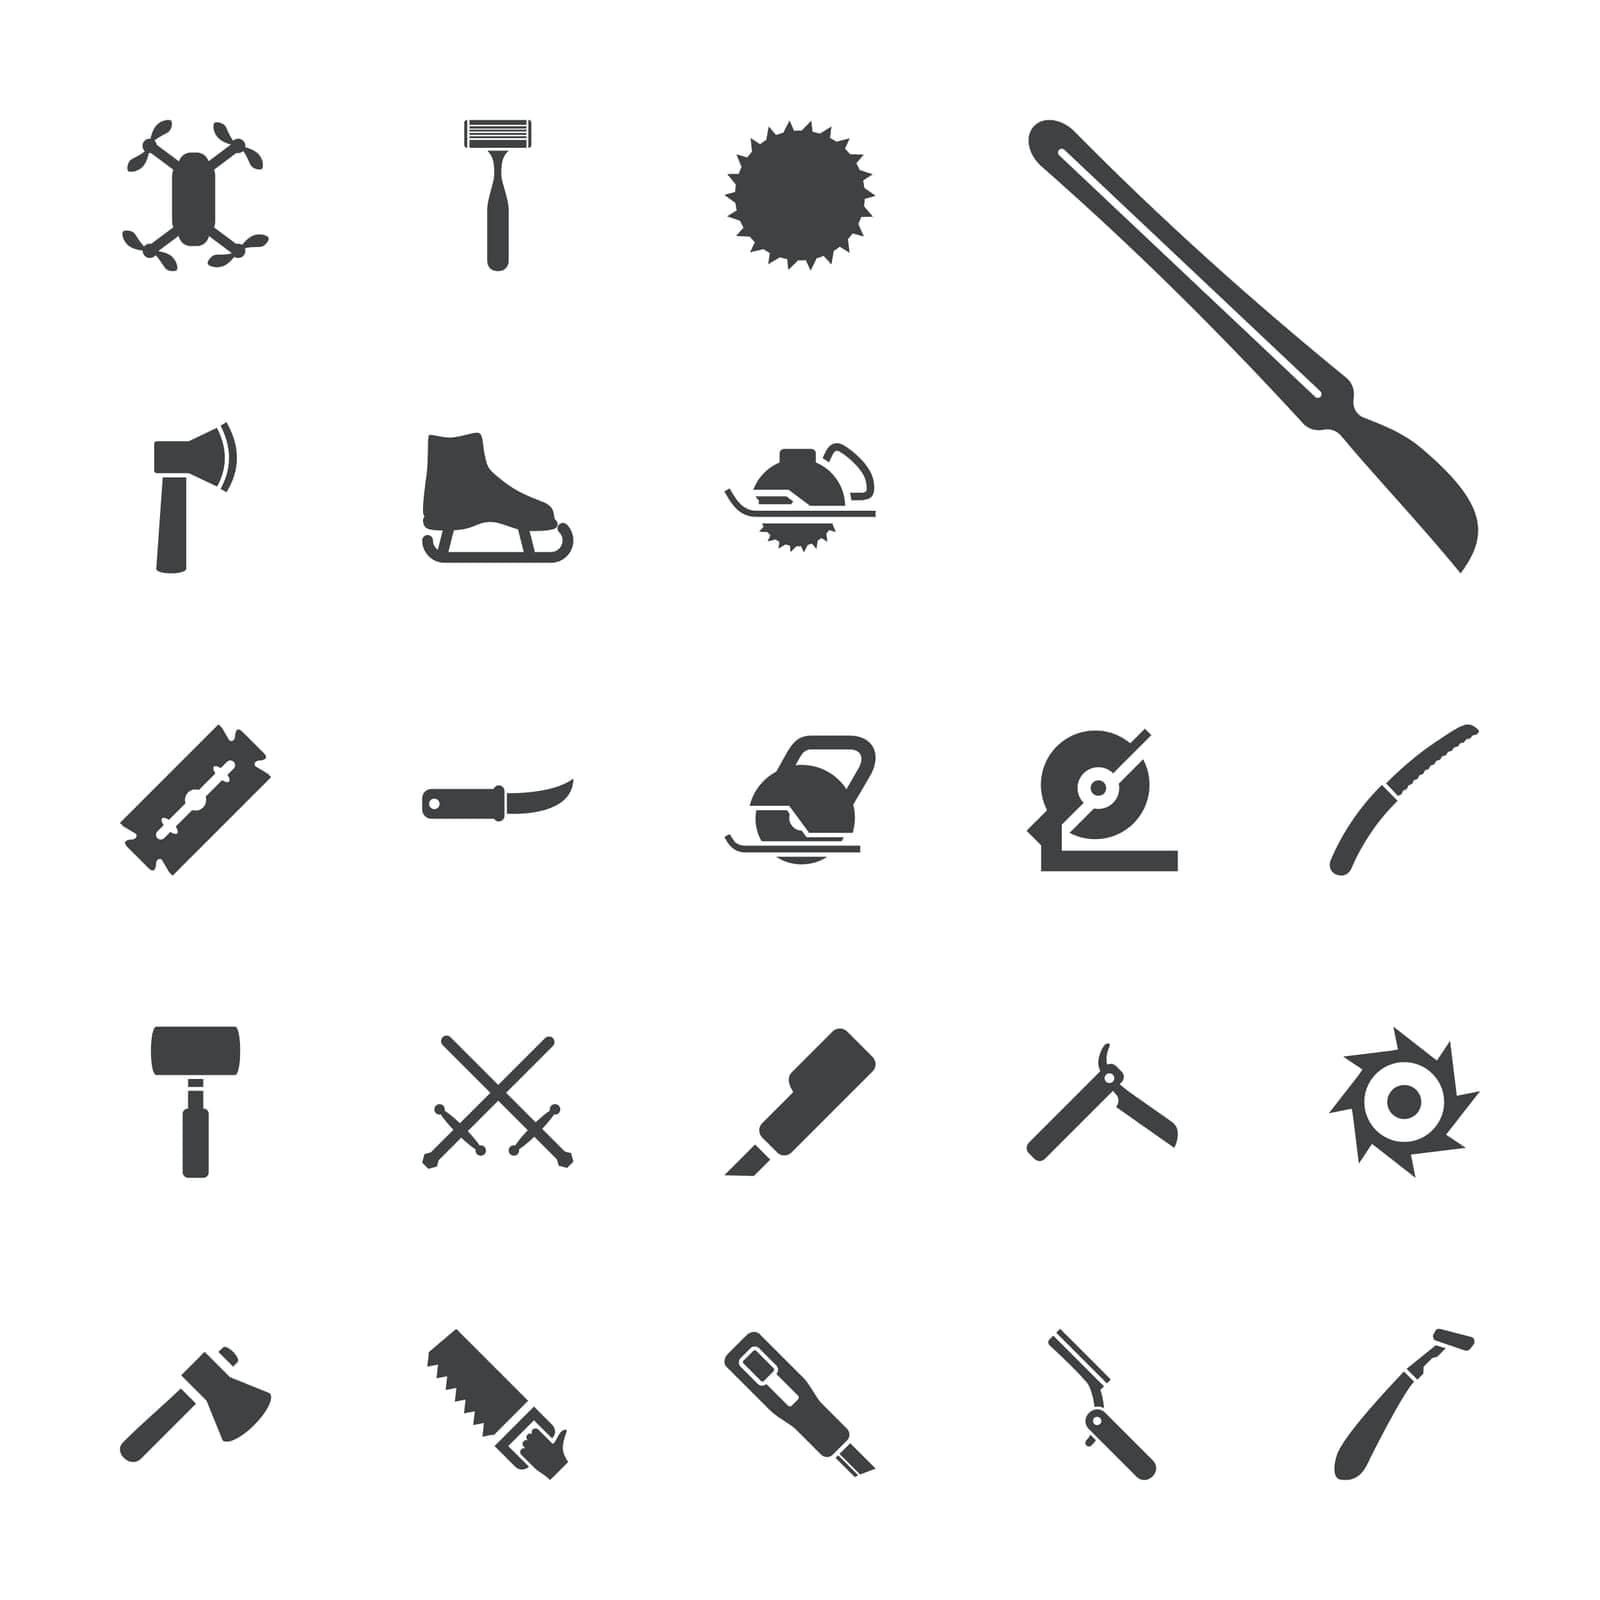 symbol,steel,cut,gardening,icon,sign,isolated,cutter,ice,blade,axe,white,flat,design,scalpel,vector,axle,graphic,element,bllade,set,propeller,electric,saw,equipment,circular,handle,tool,sharp,sword,with,knife,background,razor,illustration,skate,object,care